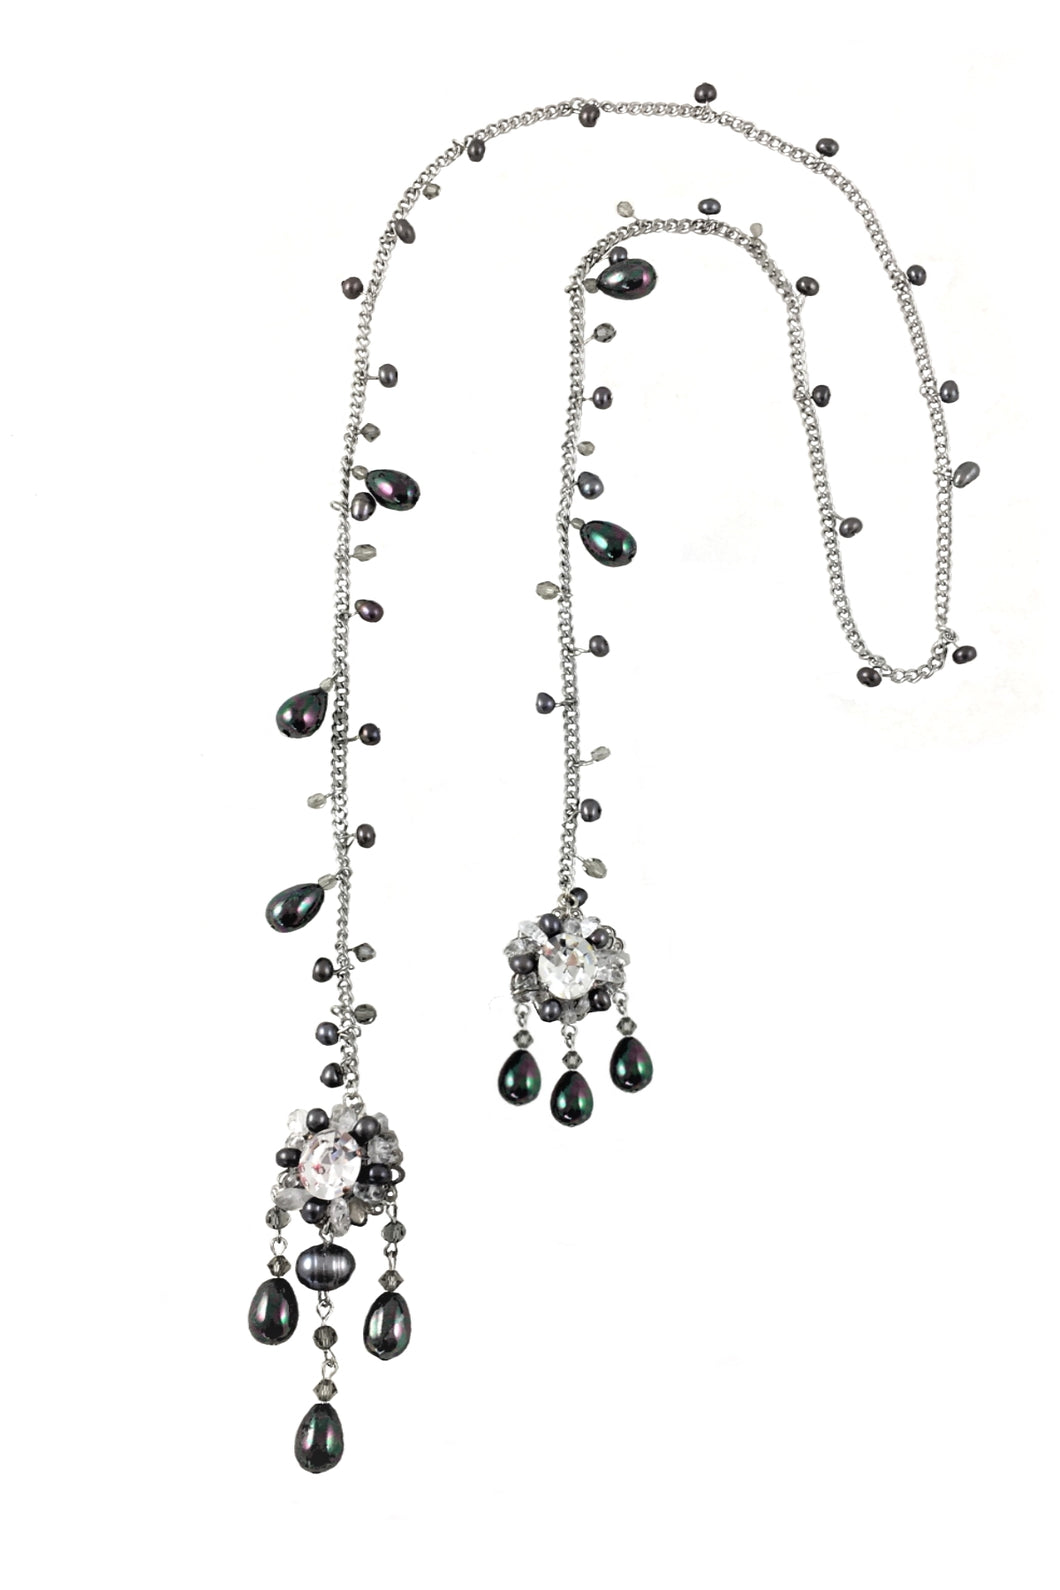 Baroque Freshwater Pearls and Swarovski Crystal Berty Necklace